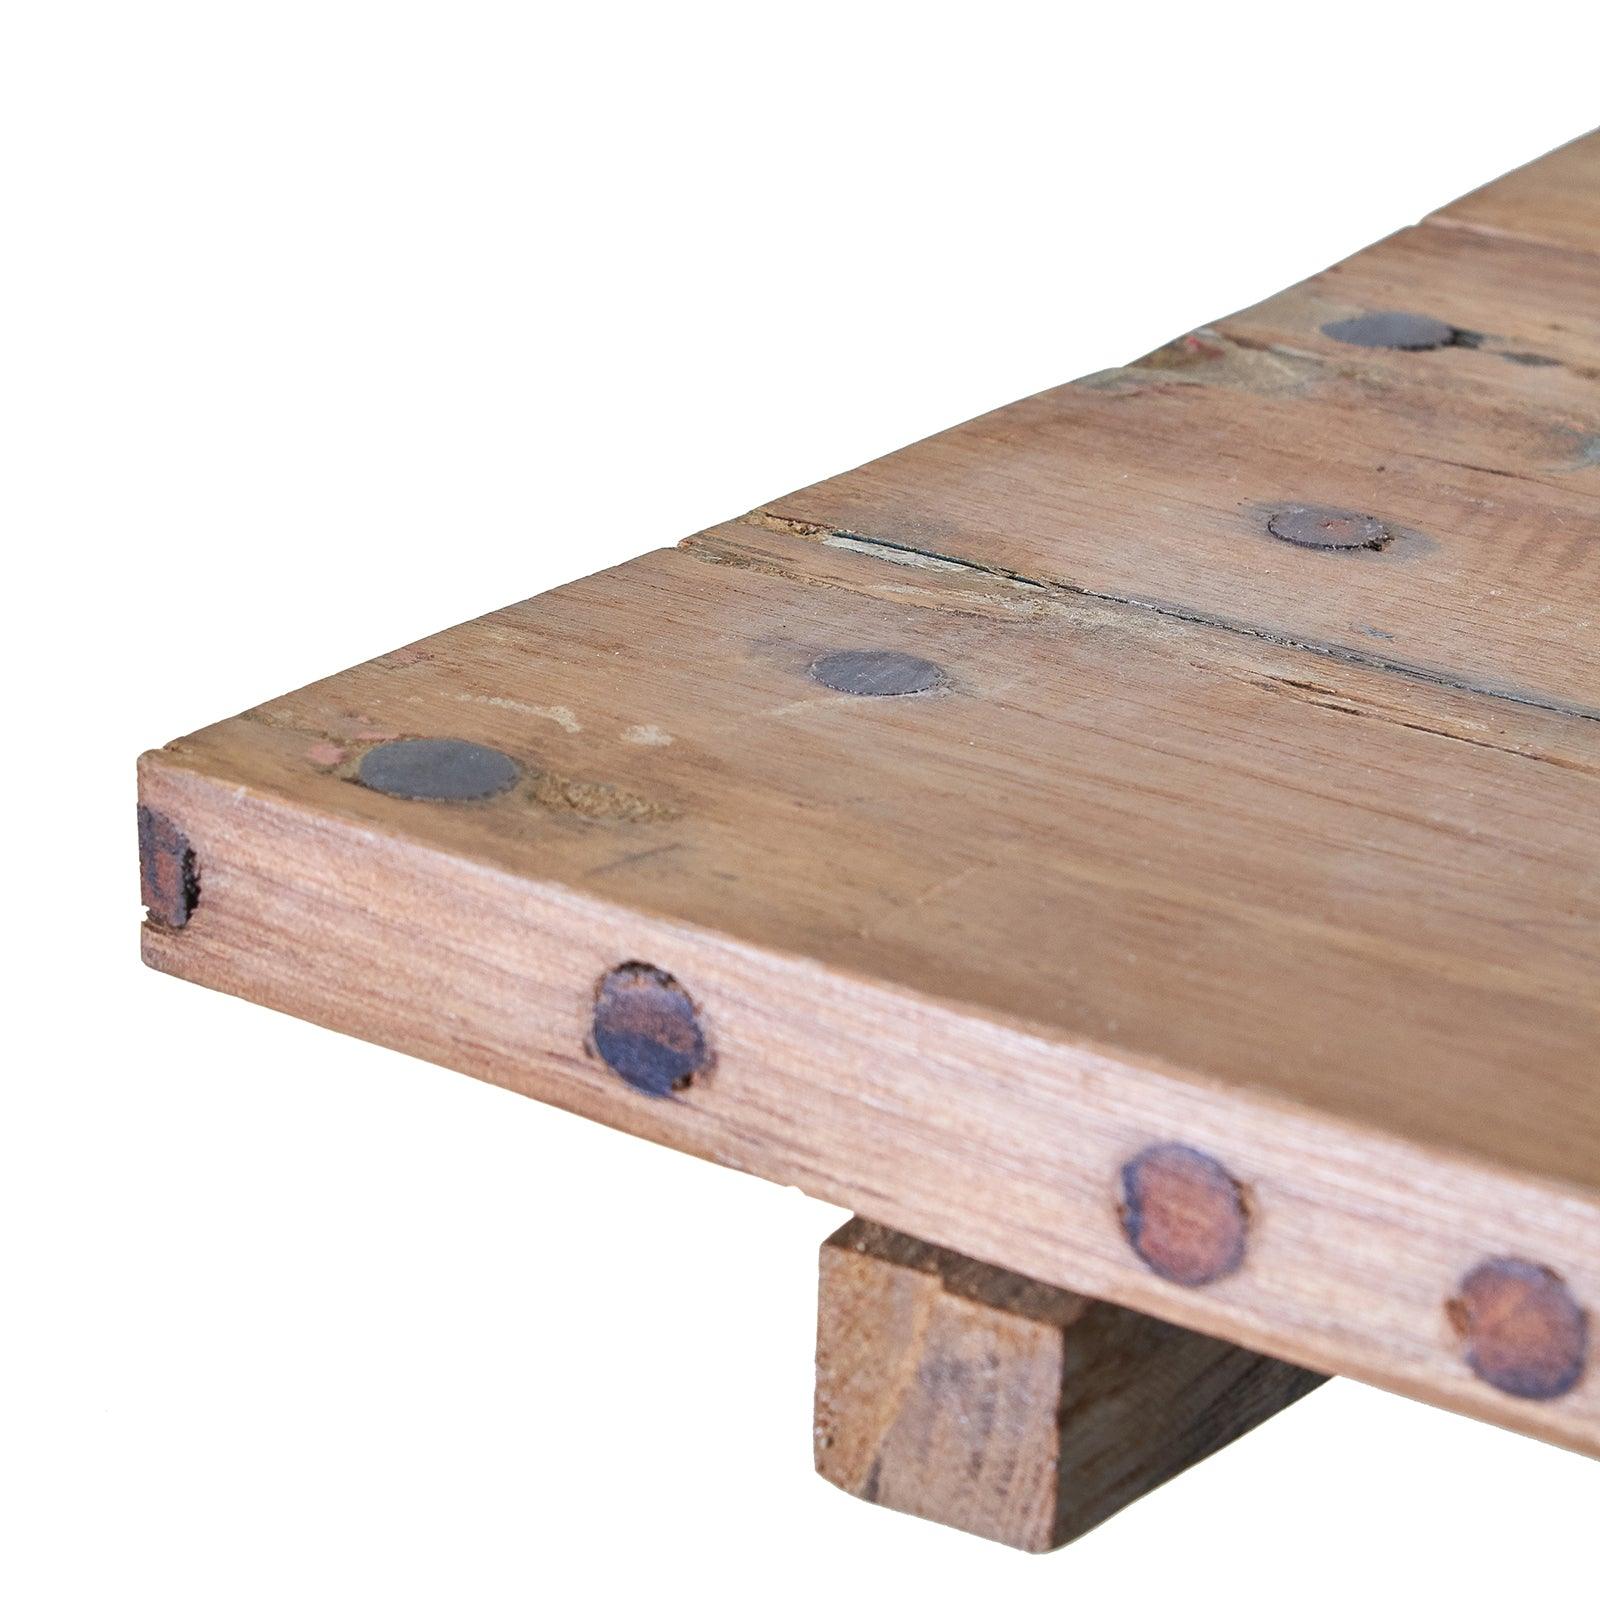 Square Folding Coffee Table - 50cm - Recycled Wood - Charming Spaces